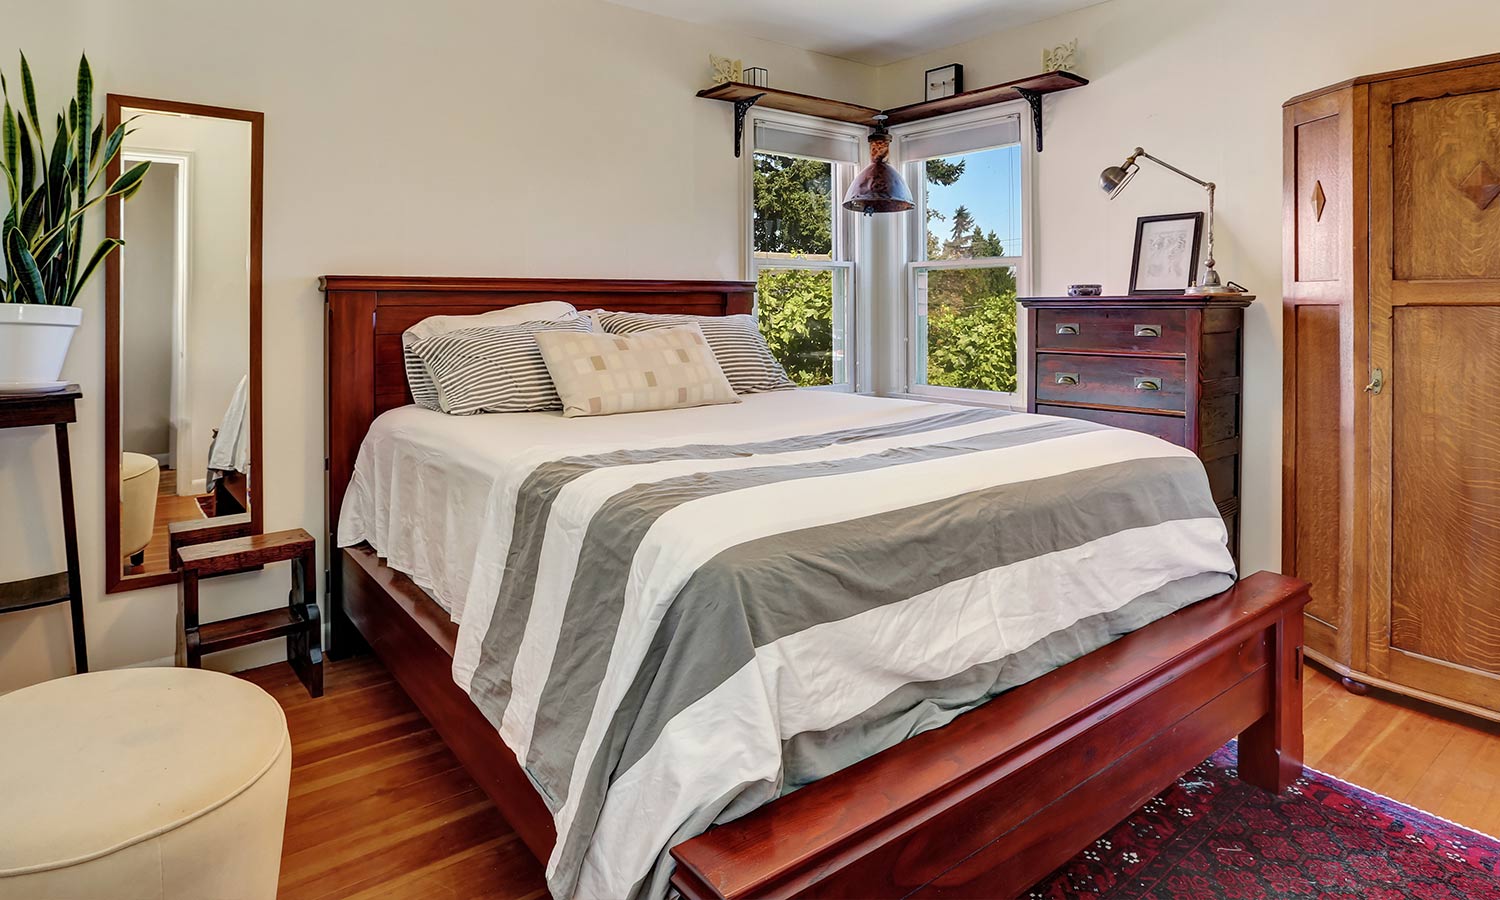 75 Diffe Types Of Beds For Every, 24 Inch High Bed Frame